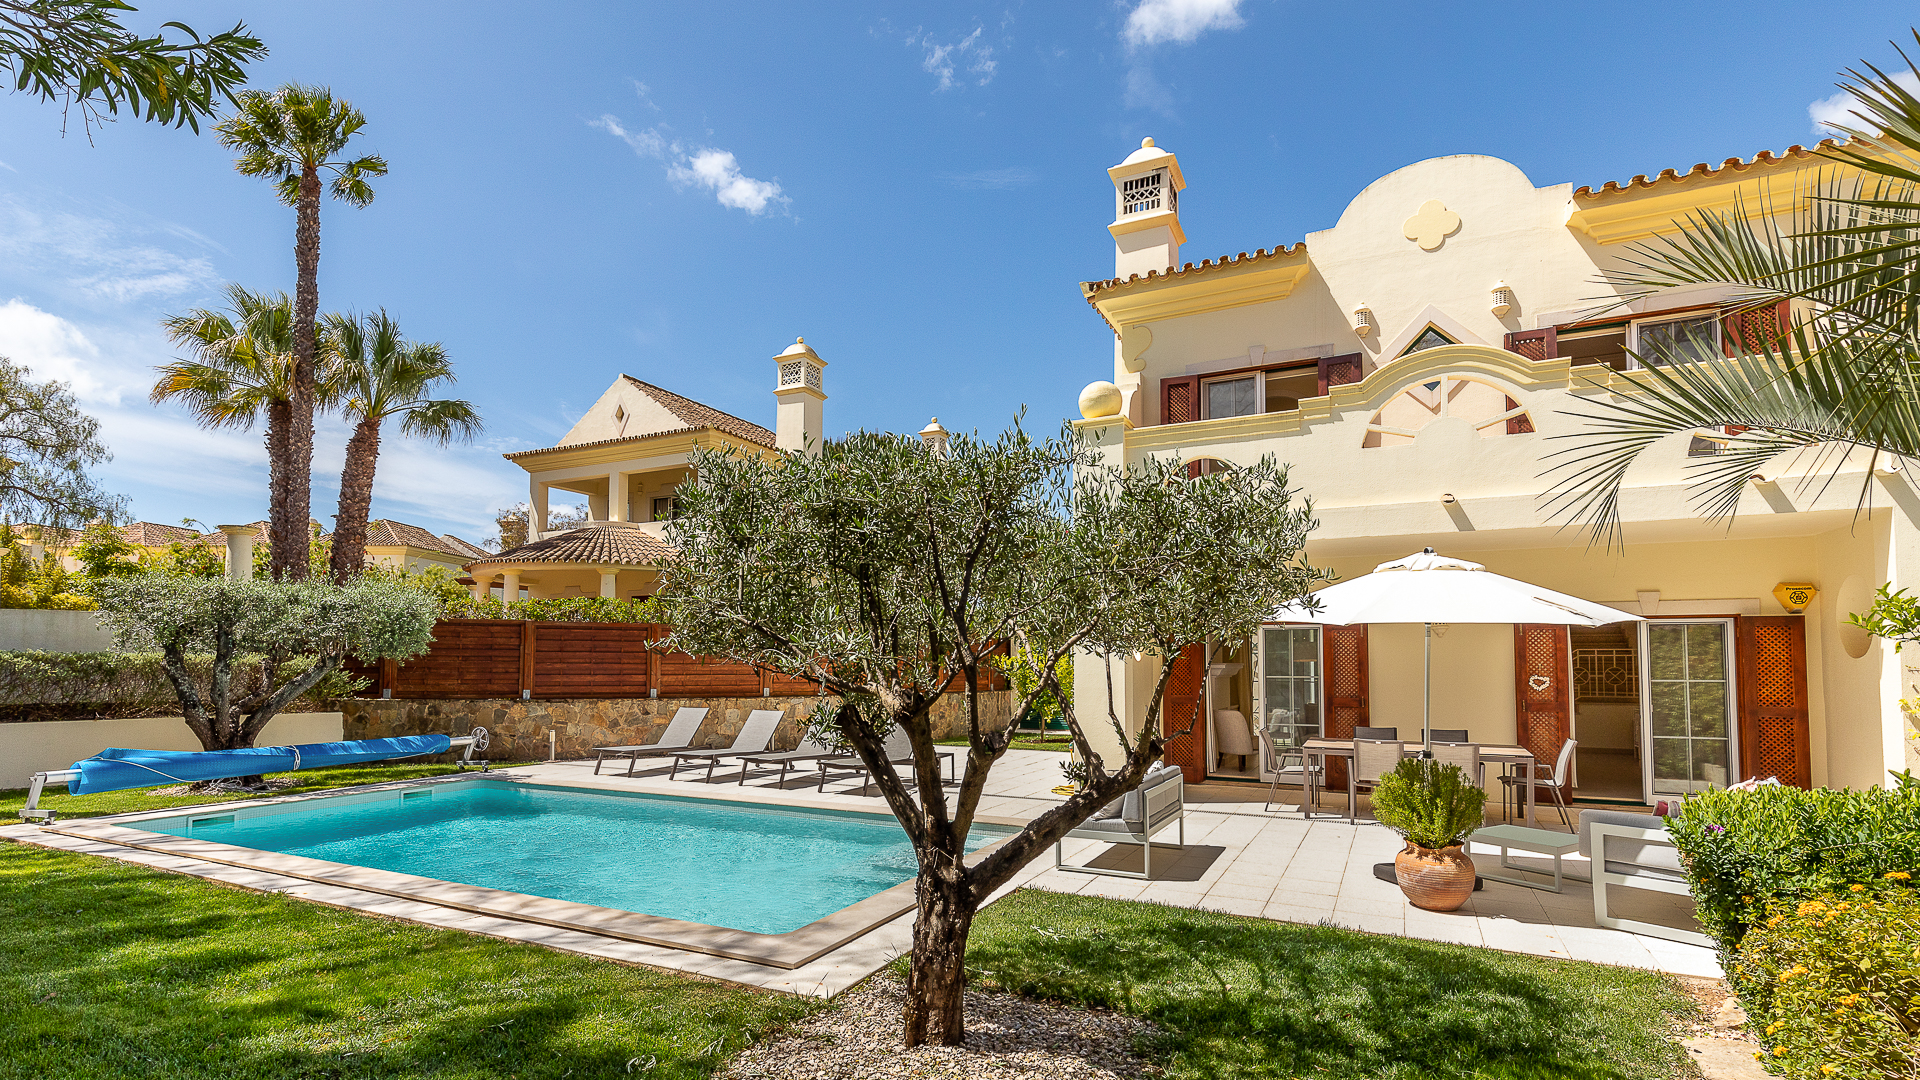 Property Image 2 - Semi-detached Quinta do Lago Townhouse with Pool